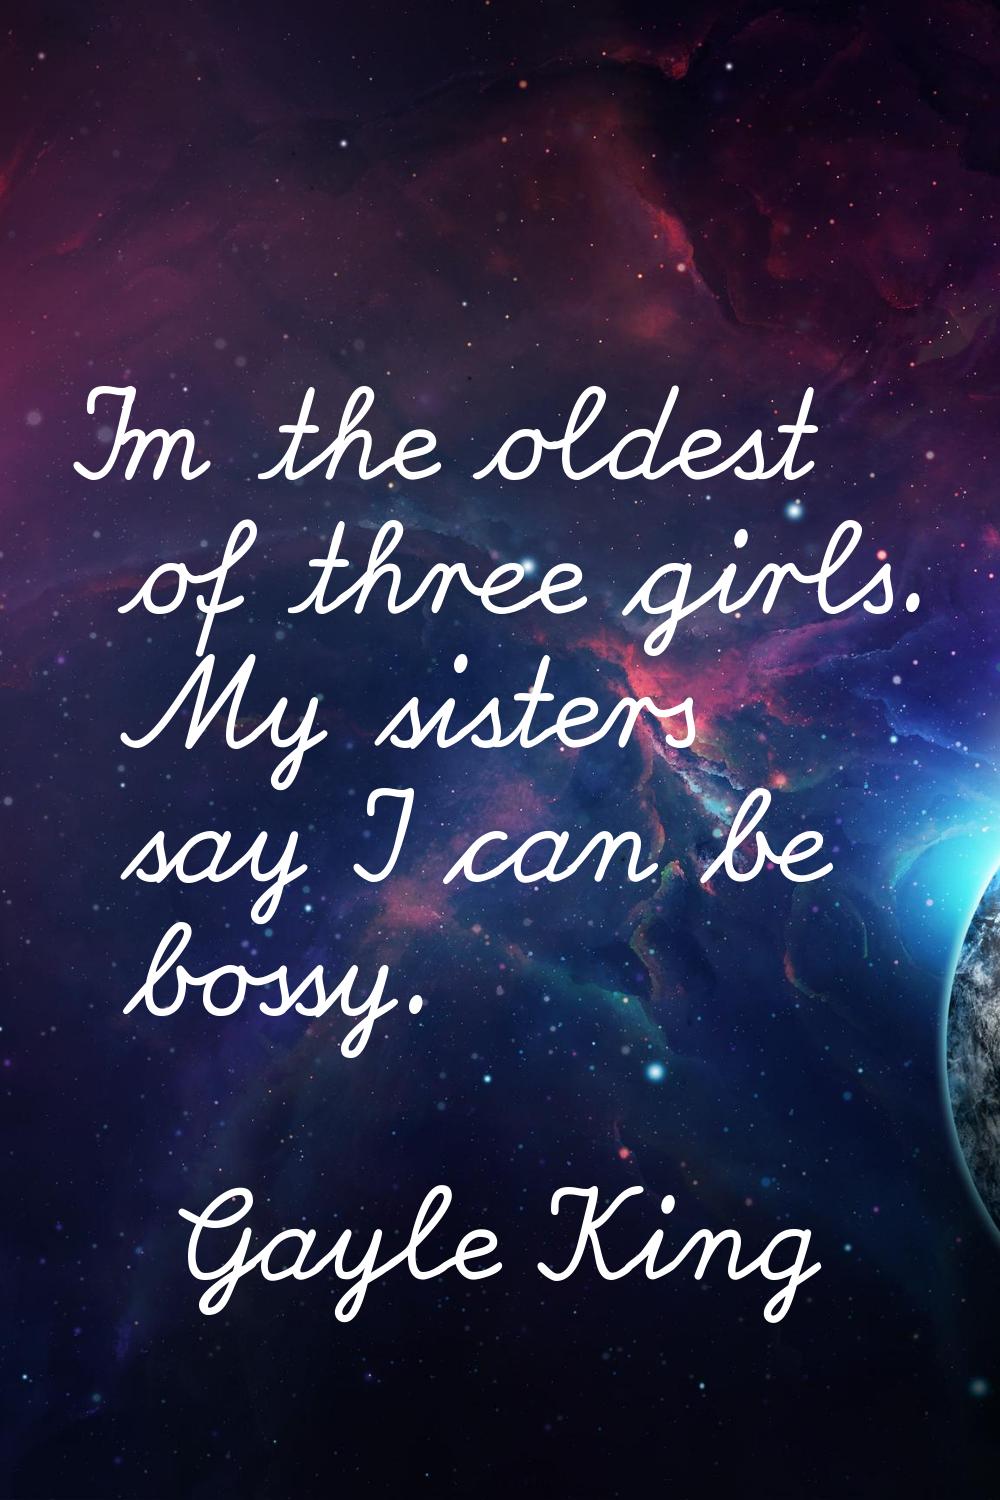 I'm the oldest of three girls. My sisters say I can be bossy.